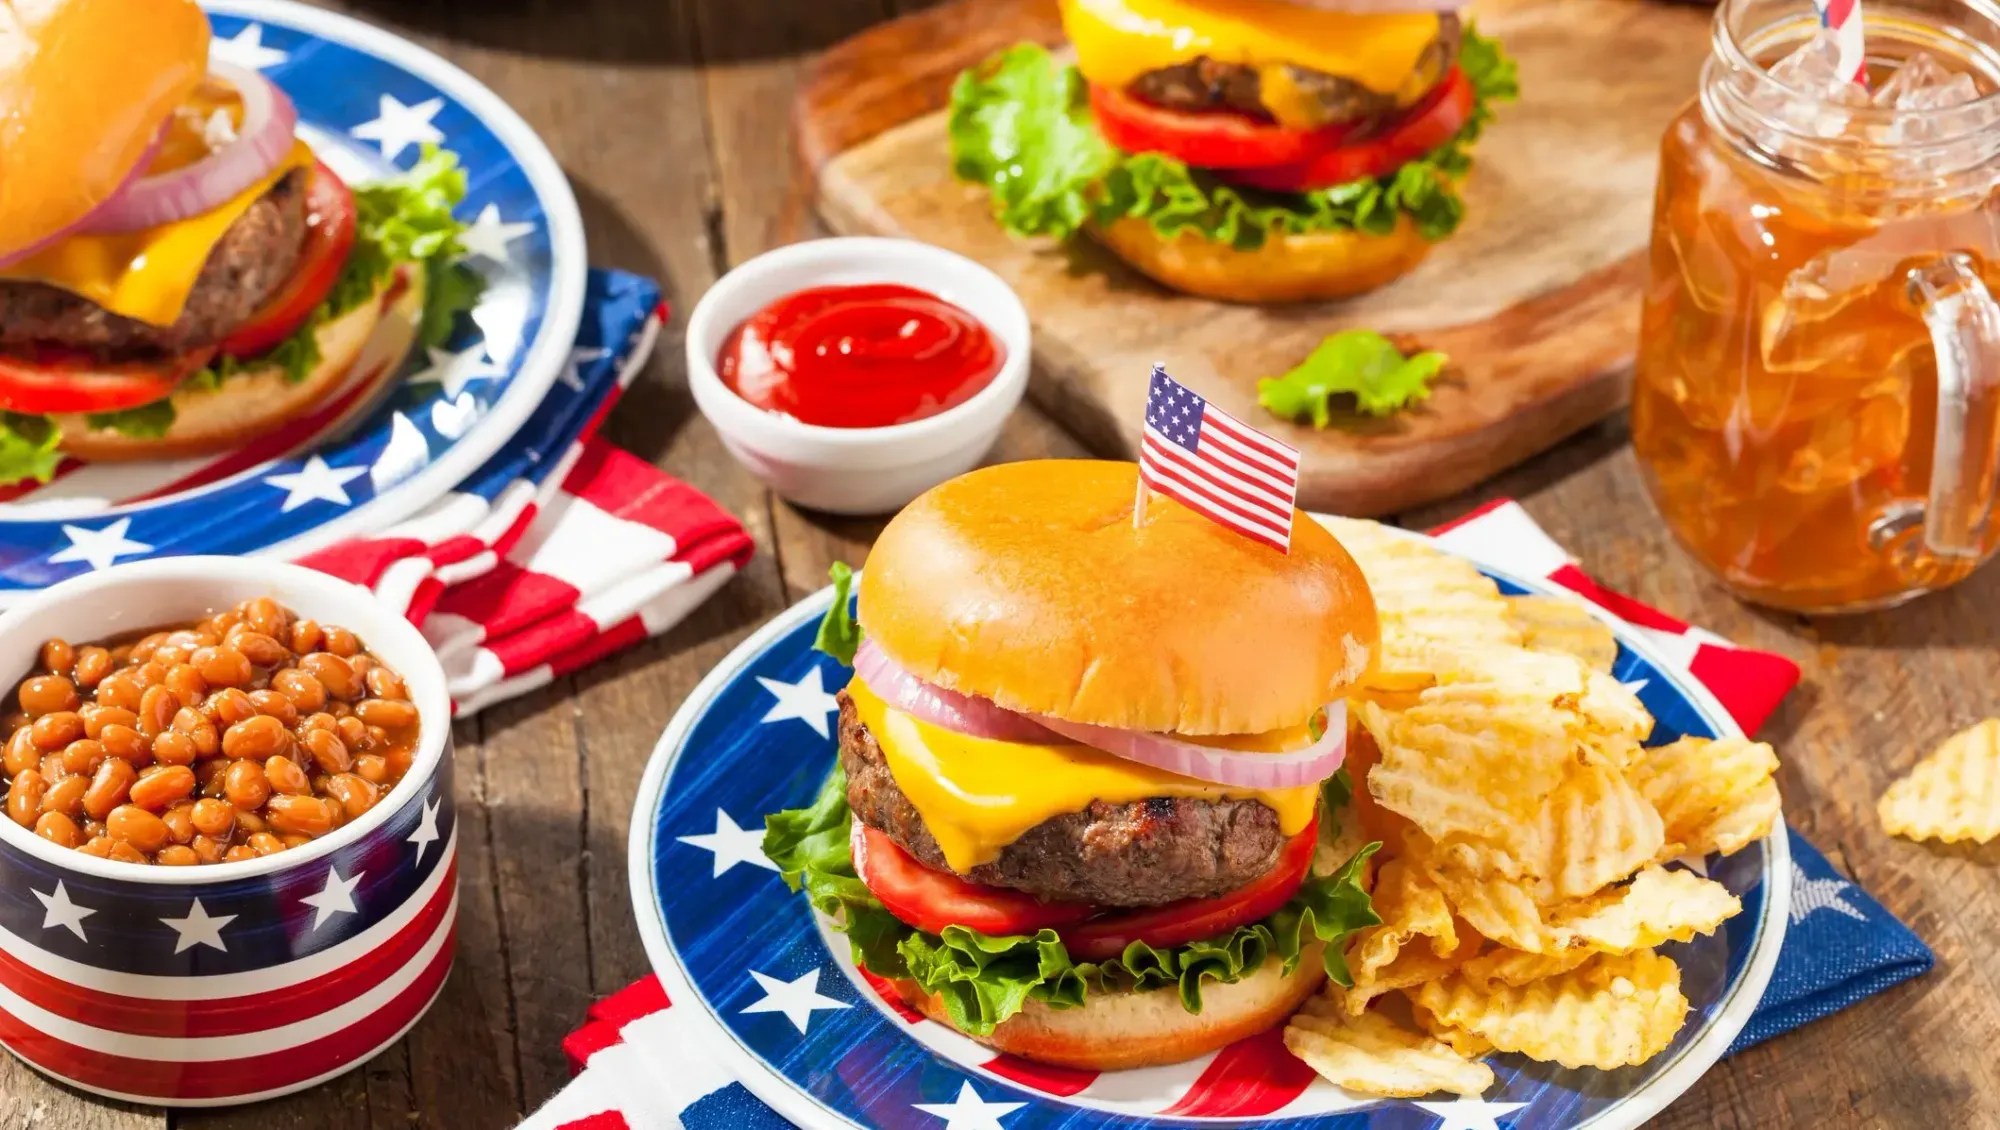 Celebrate Independence Day with Healthy and Delicious Food: 4th of July Food Ideas